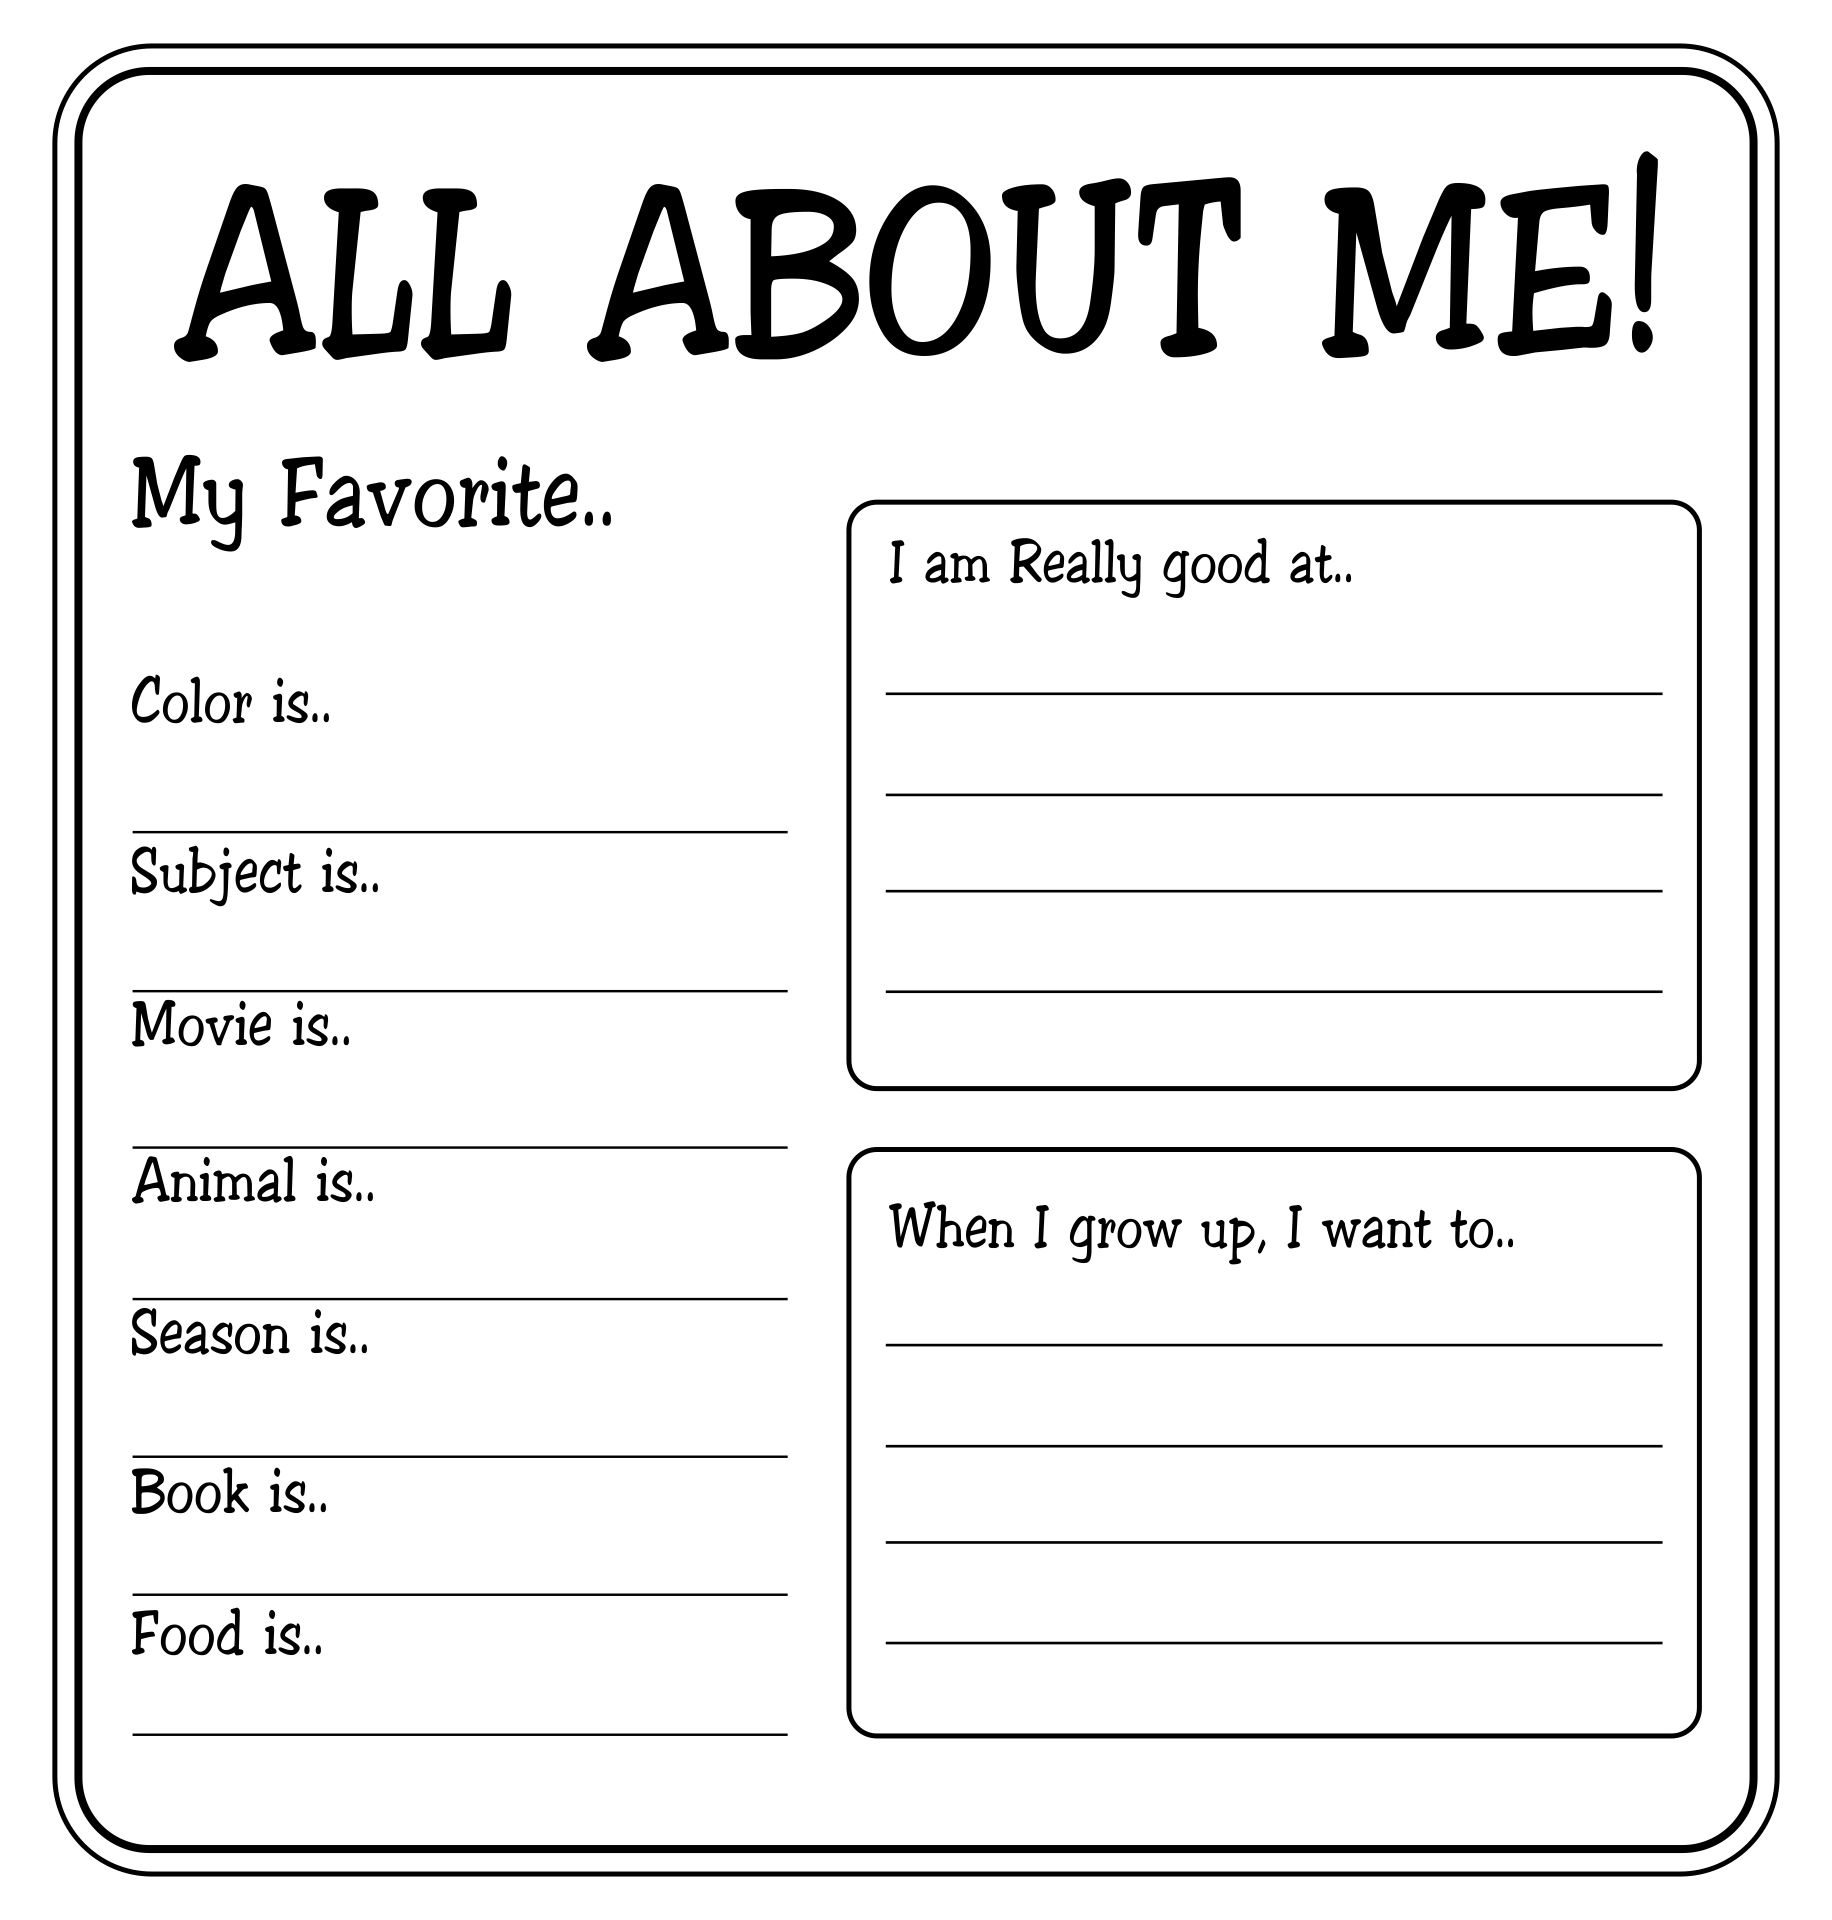 20-best-free-printable-all-about-me-form-for-high-school-pdf-for-free